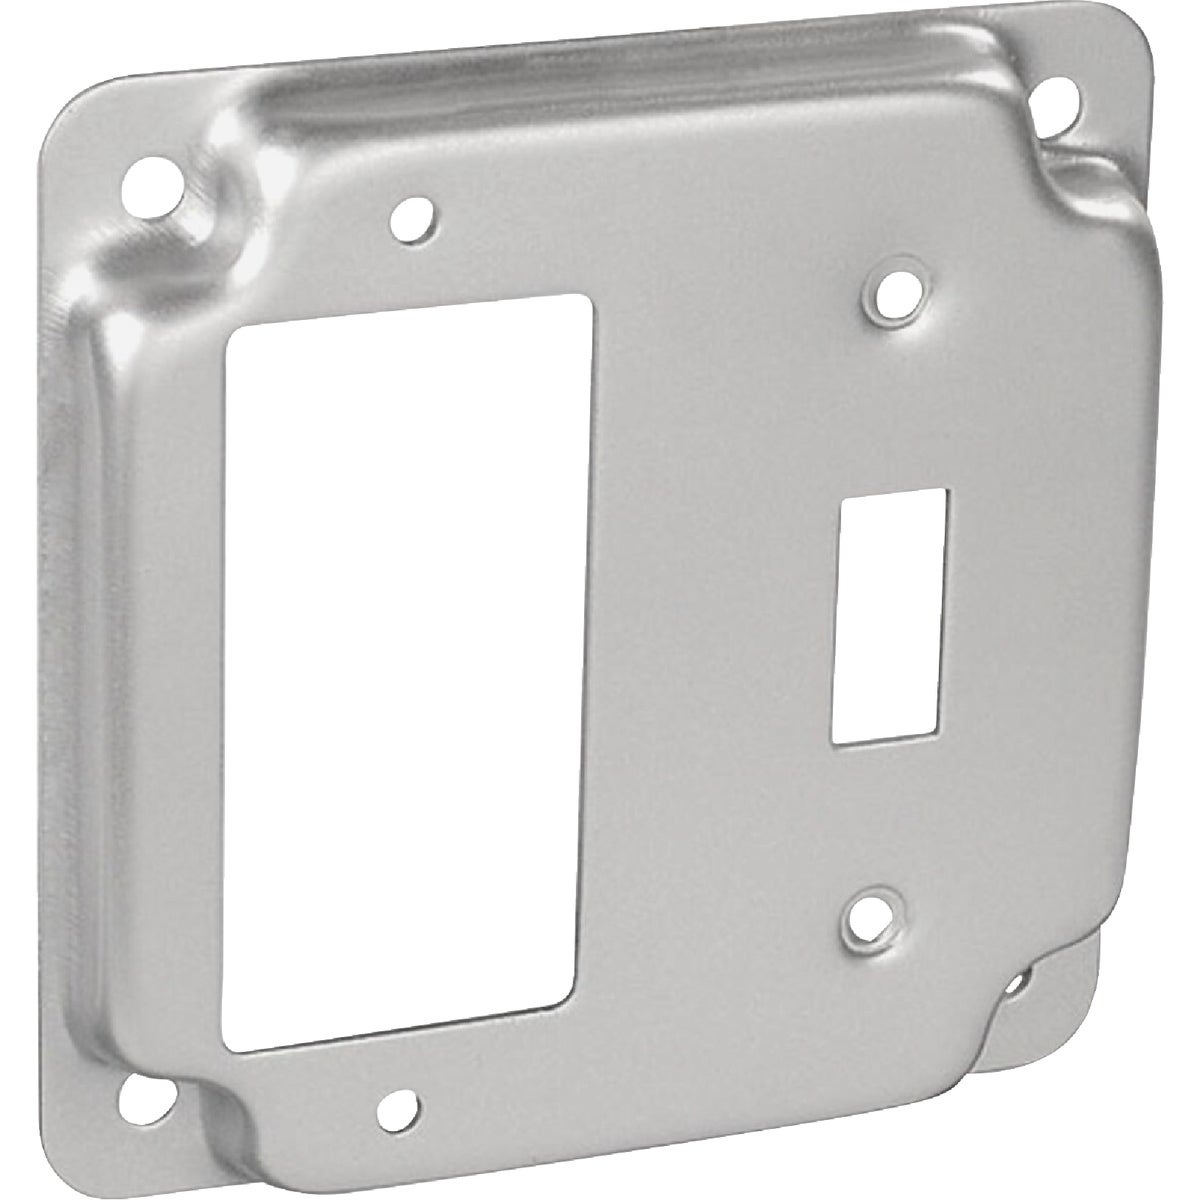 Item 533092, Square industrial surface cover used to close a 4 In.